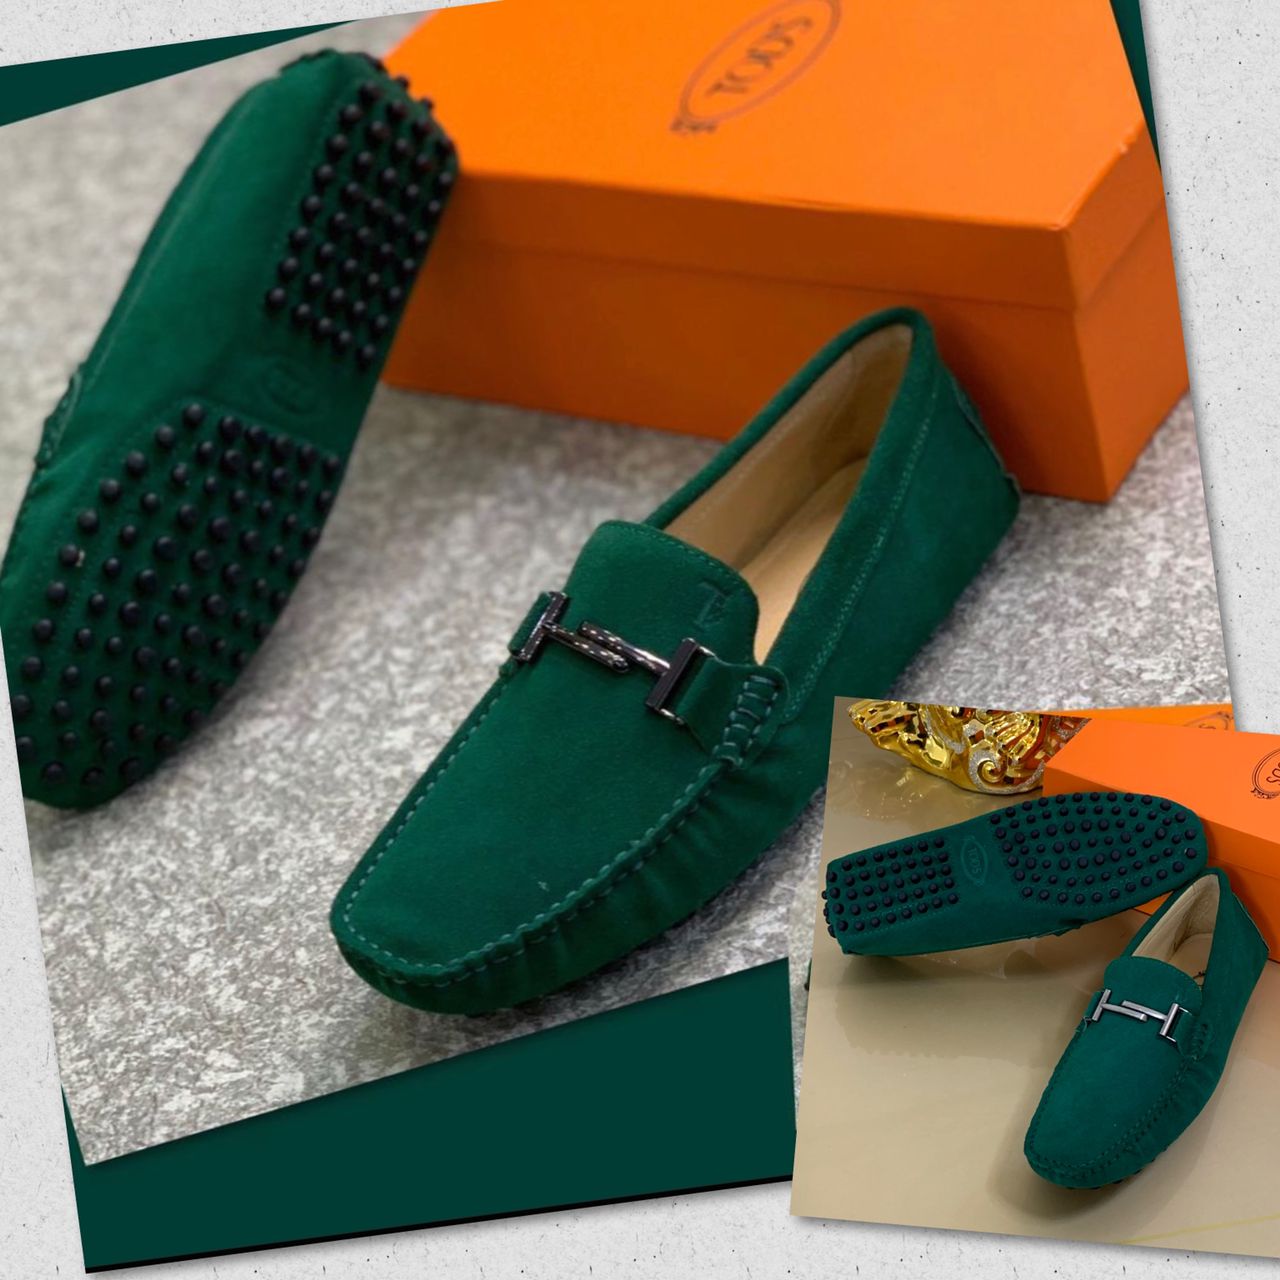 CASUAL FASHION SUEDE LOAFERS for CartRollers Marketplace For Shopping Online, Fashion, Electronics, Phones, Computers and Buy Men Shoe, Home Appliances, Kitchen-wares, Groceries Accessories, ankara, Aso-Ebi, Beads, Boys Casual Wears, Children Children's Wears ,Corporate Shoes, Cosmetics Dress ,Dresses Fashion, Girls' Dresses ,Girls' Wears, Hair Care ,Jewelries ,Jewelry Kids, Kids' Fashion Ladies ,Wears Lapel Pins, Loafers Shoe Men ,Men's Caftan, Men's Casual Shoes, Men's Fashion, Men's Shoes, Men's Wears, Moccasin Shoe, Natural Hair, In Lagos Nigeria